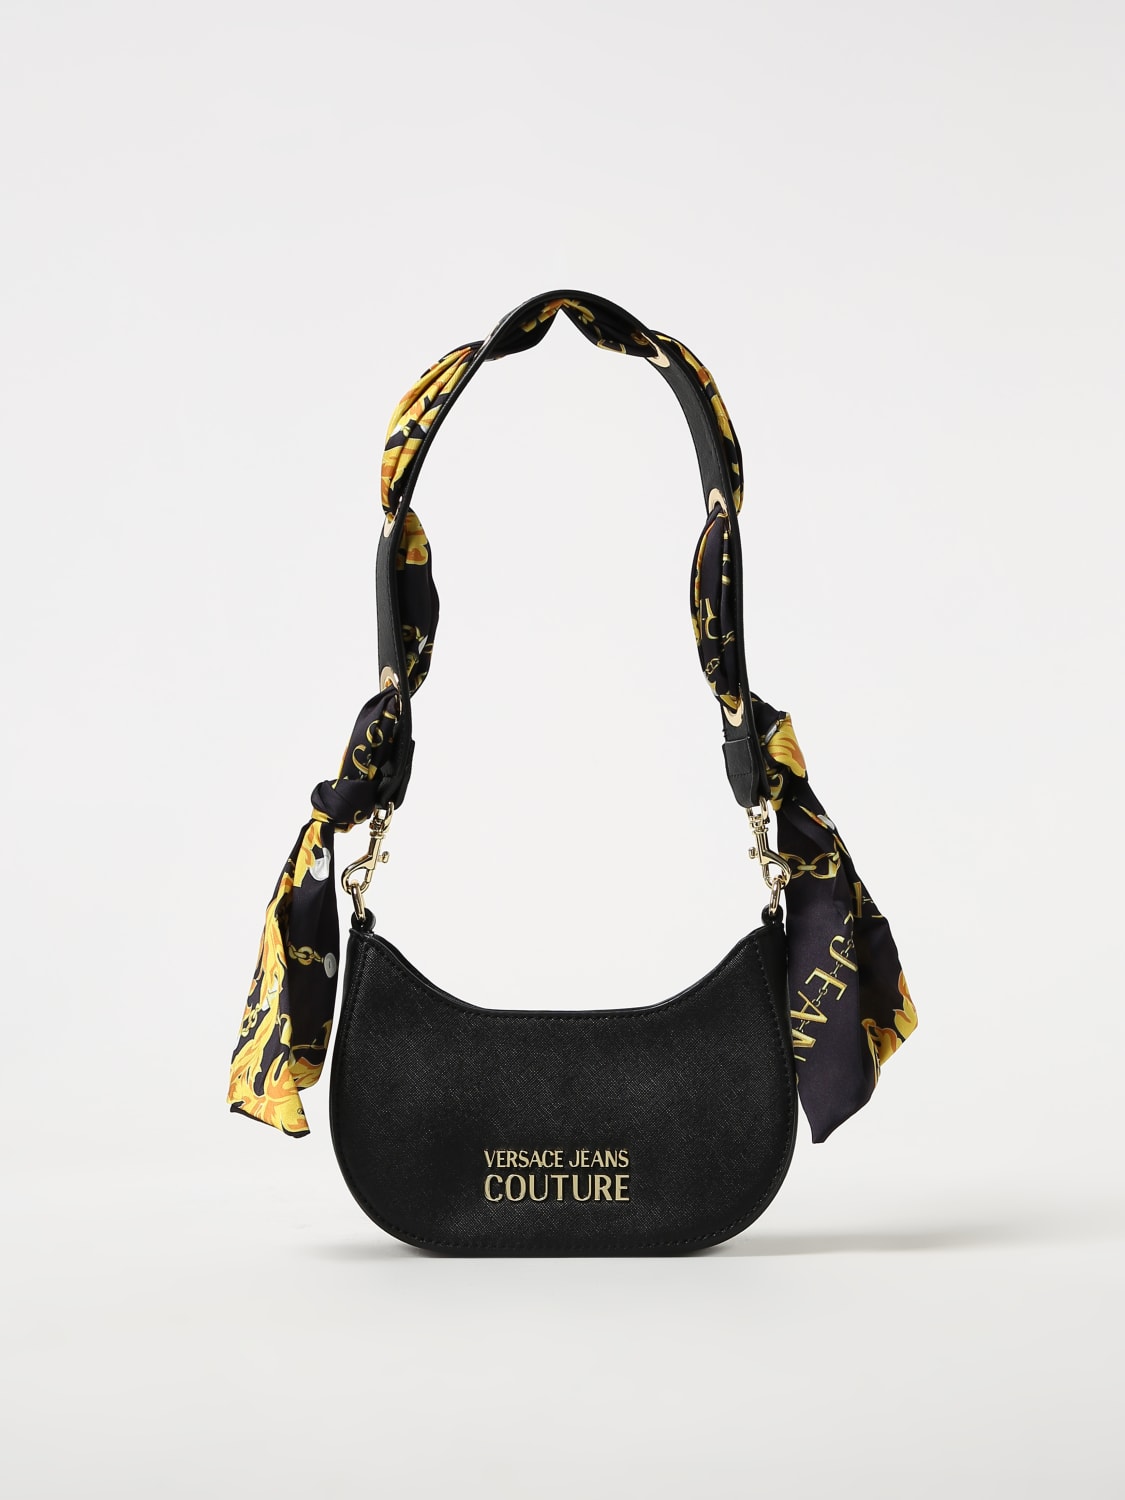 VERSACE JEANS COUTUREアウトレット：ハンドバッグ レディース ...